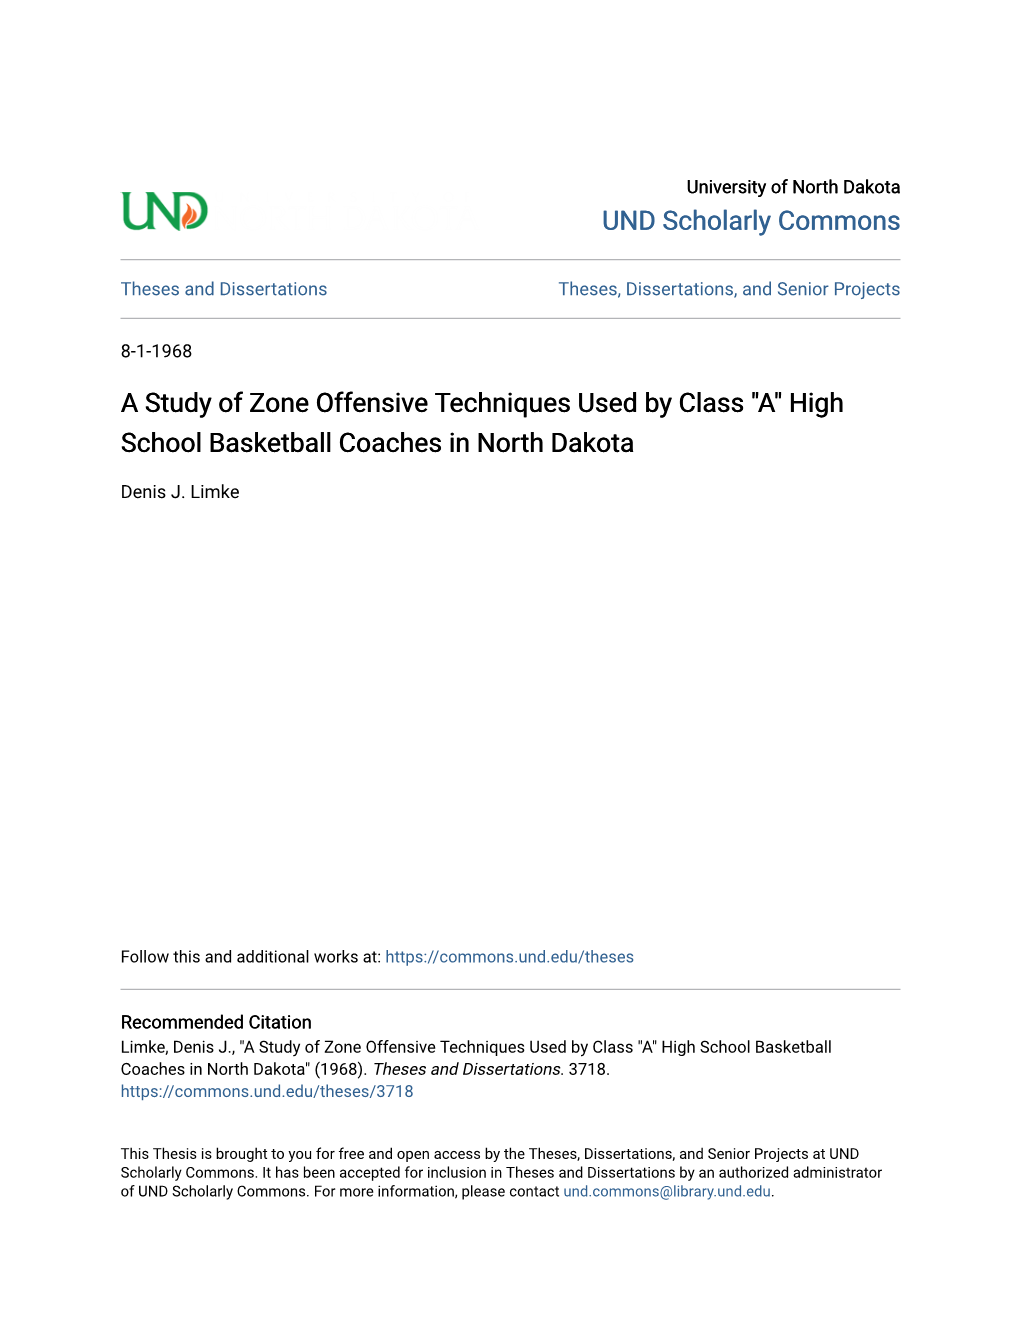 A Study of Zone Offensive Techniques Used by Class "A" High School Basketball Coaches in North Dakota